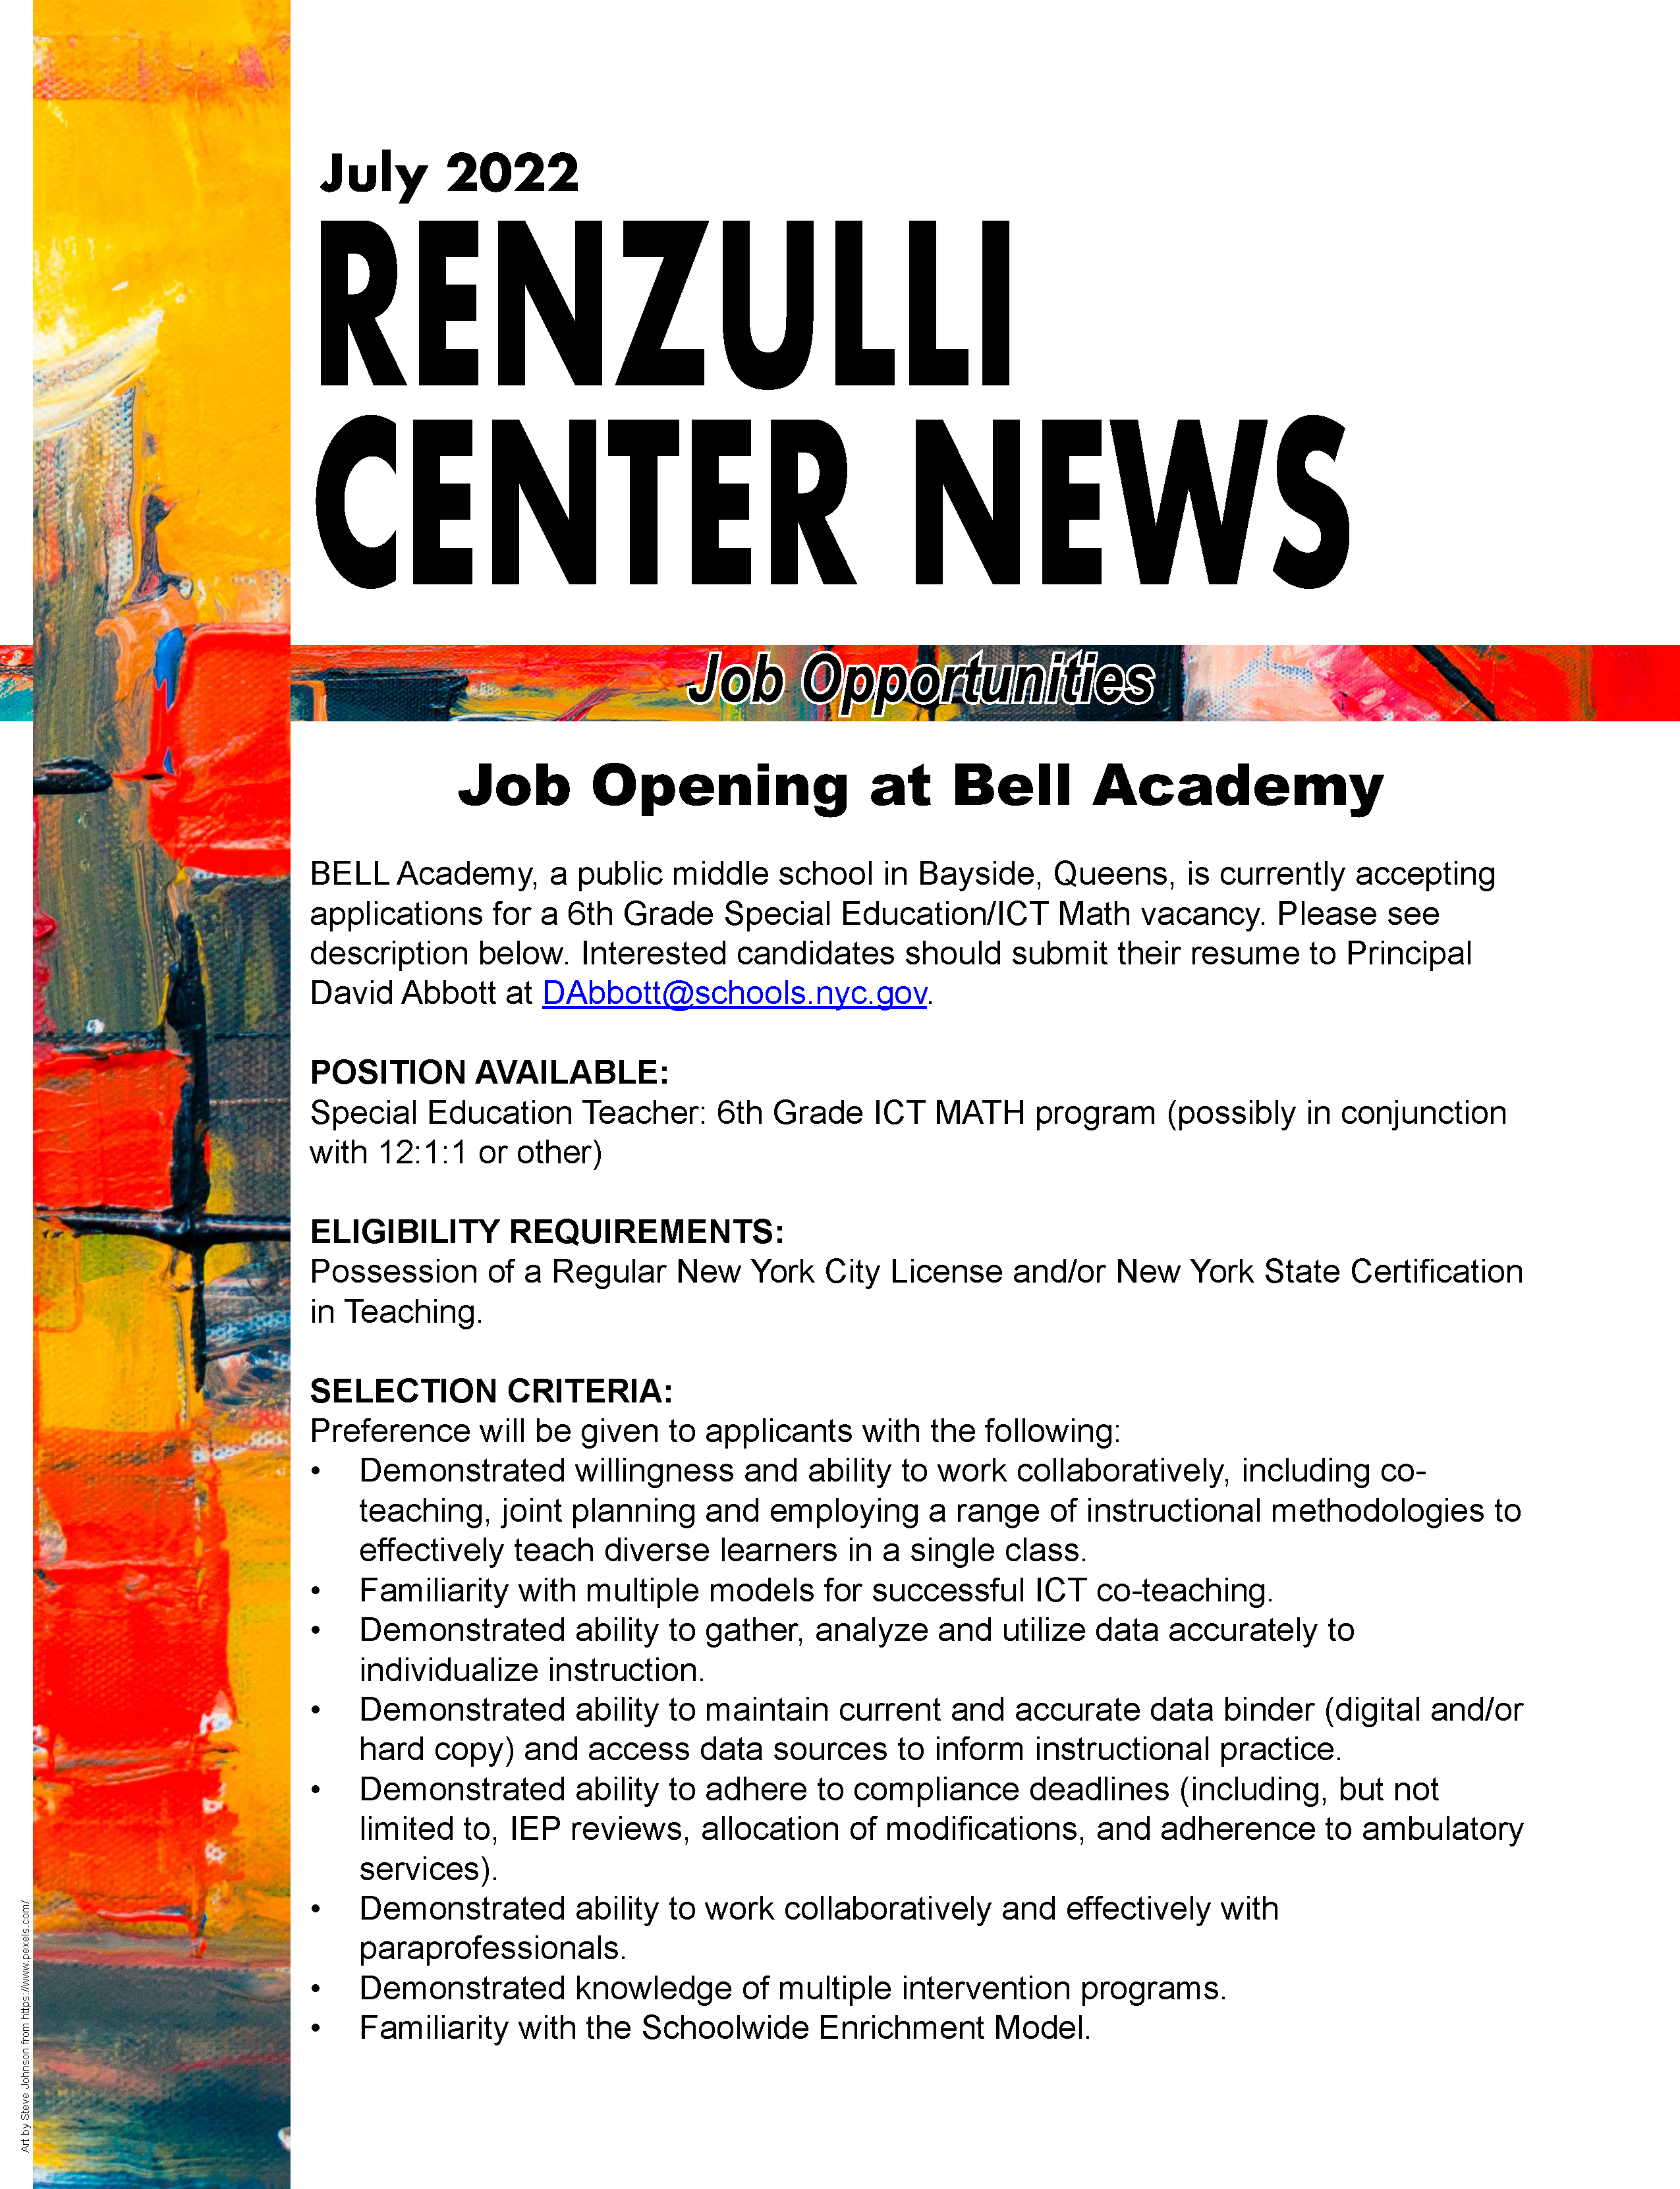 July 2022 Renzulli News Cover Graphic